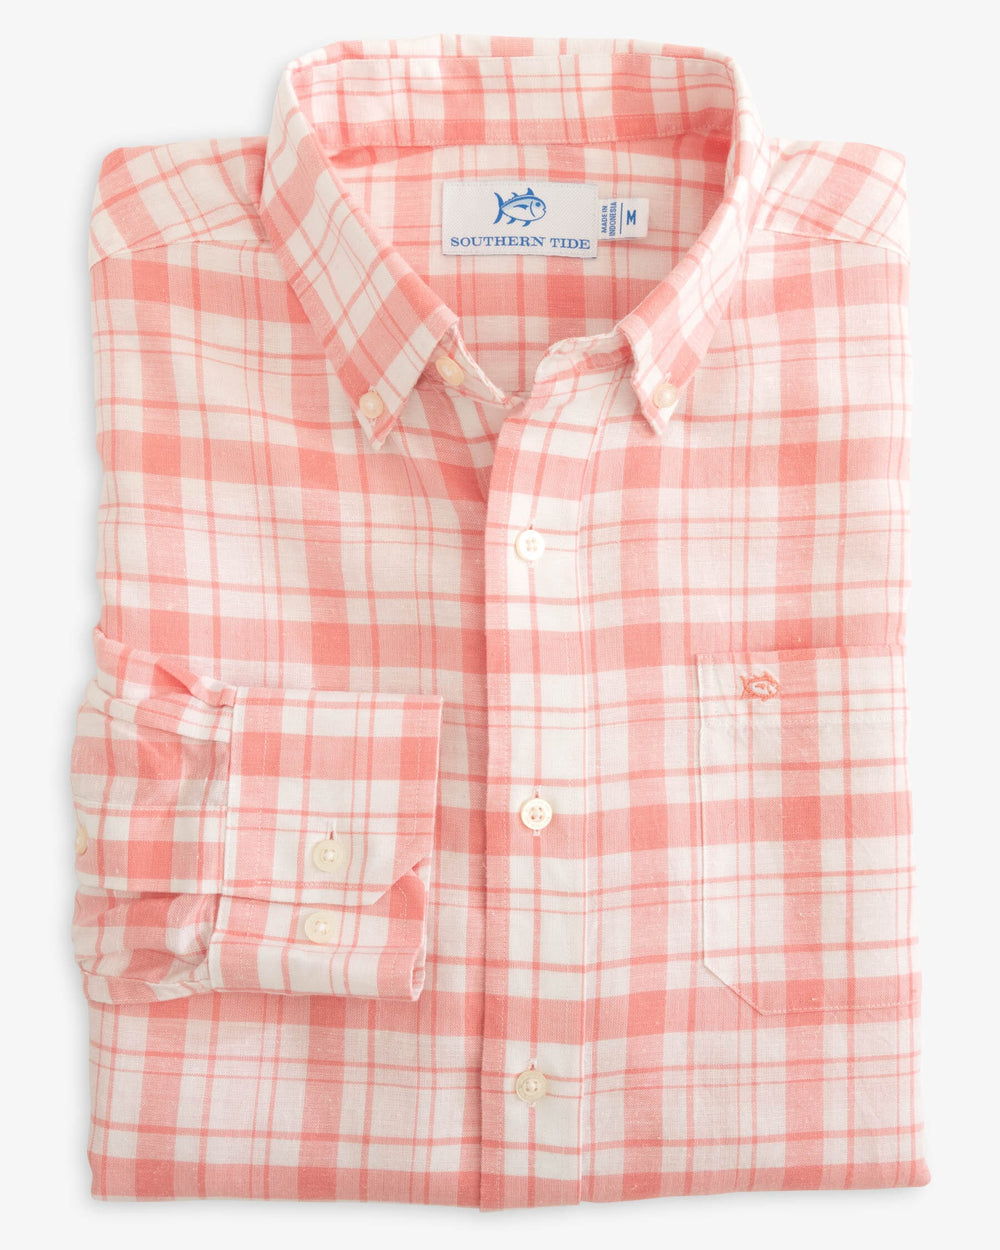 The folded view of the Southern Tide Headland Moultire Plaid Long Sleeve Sport Shirt by Southern Tide - Flamingo Pink